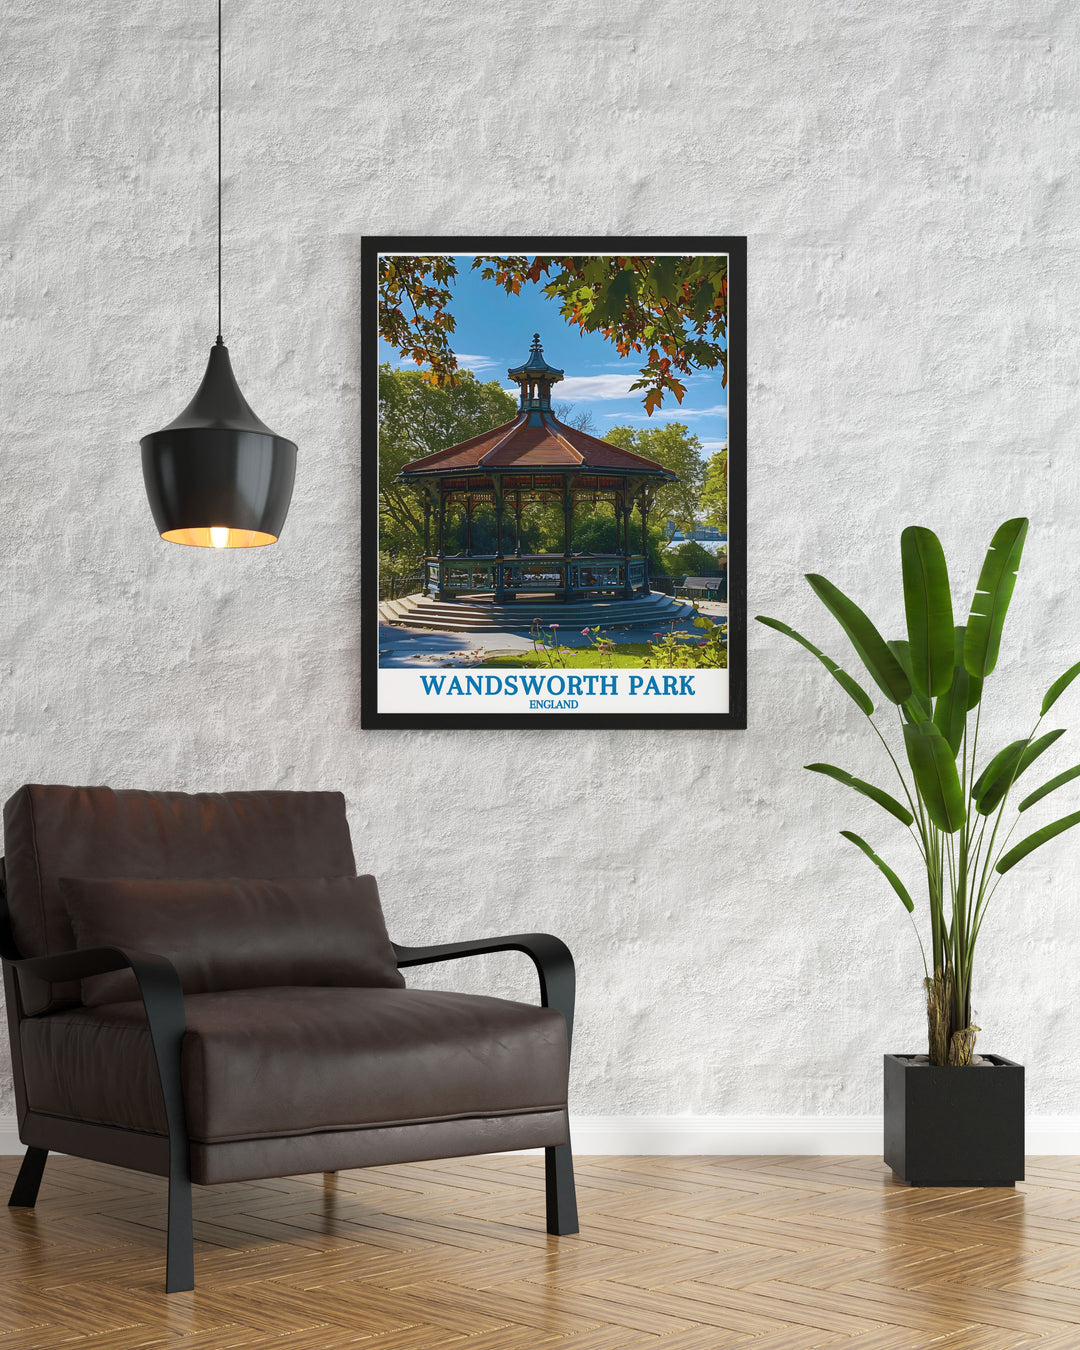 This fine art print captures the peaceful ambiance of Wandsworth Park, showcasing its wide open spaces and mature trees. Ideal for adding a touch of Londons natural beauty and historical depth to your home or office decor, it celebrates the parks role as a cherished green space for over a century, offering a serene retreat in the city.